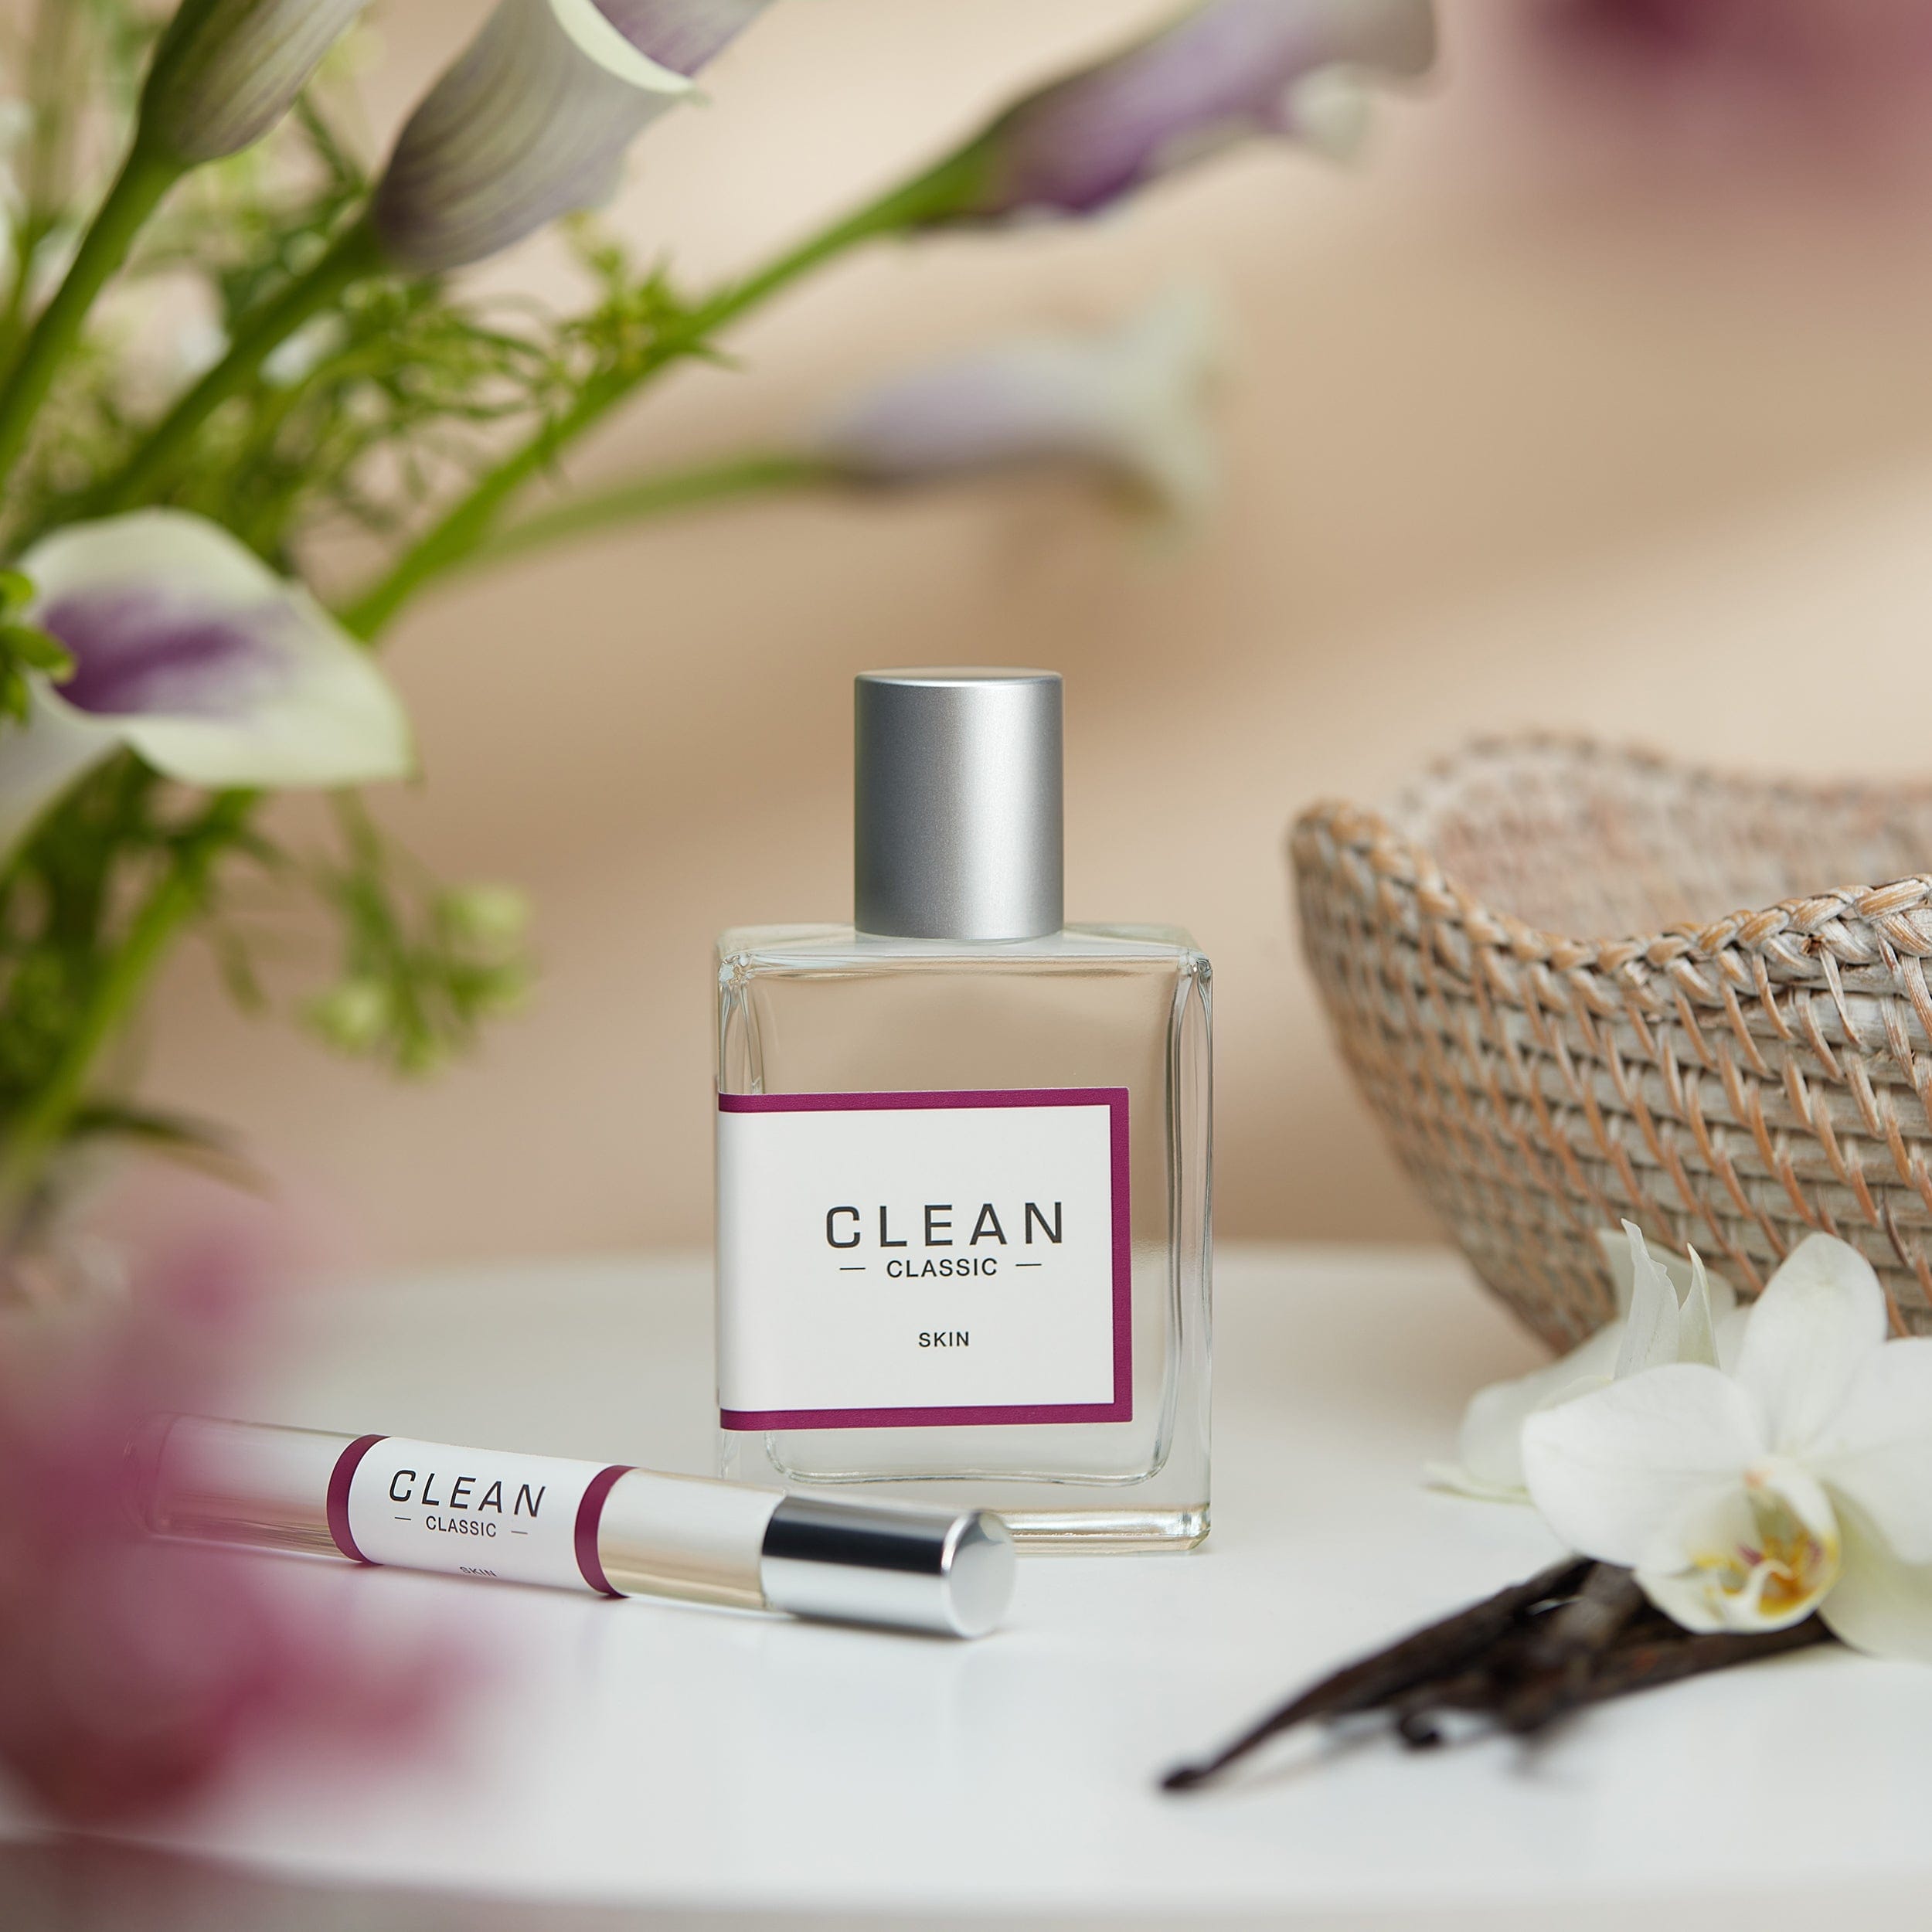 Classic Fresh-Smelling Perfumes For Women